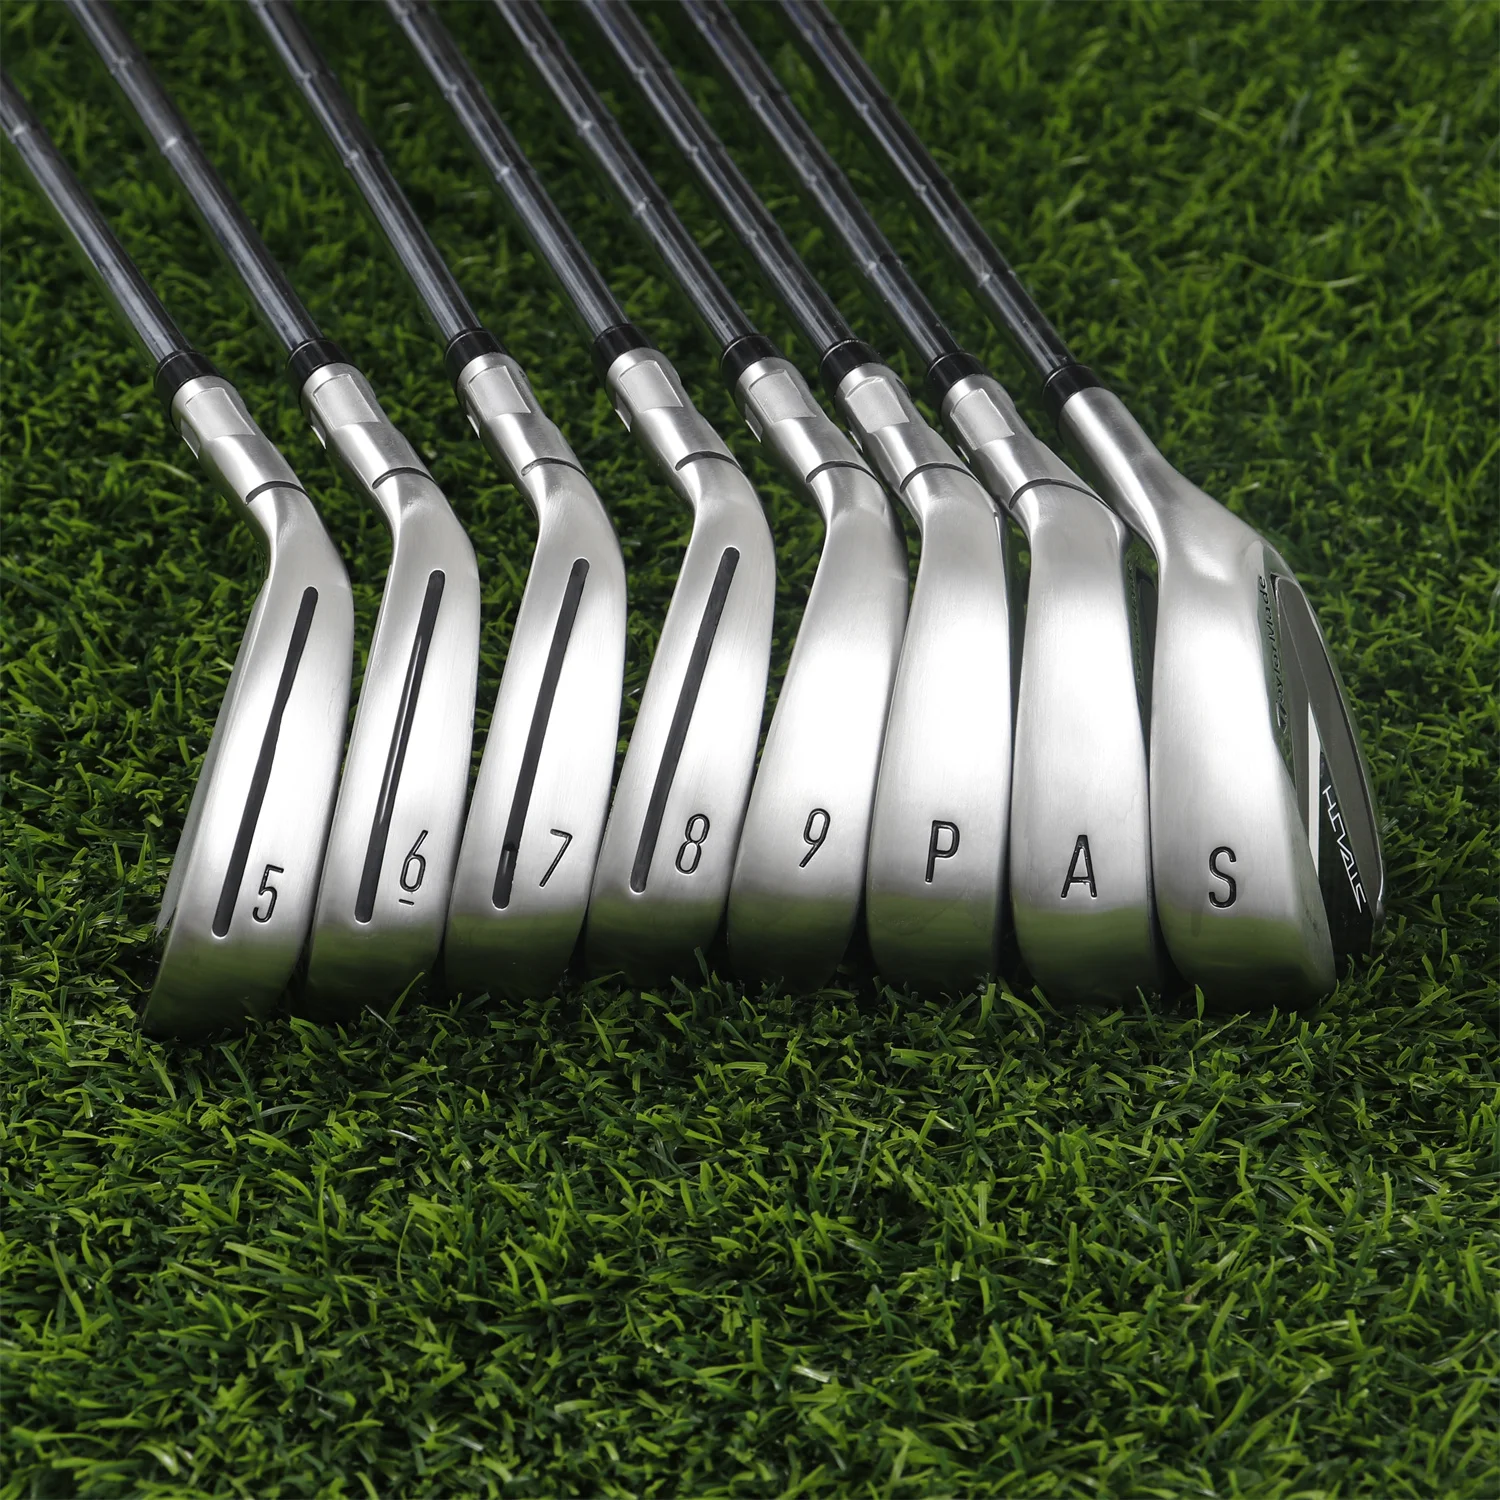 

8PCS Golf Clubs STEATH Golf Irons Set TLM 5-9.PA S Right Handed Forged R/S/SR Flex Steel/Graphite Shaft With Head Cover